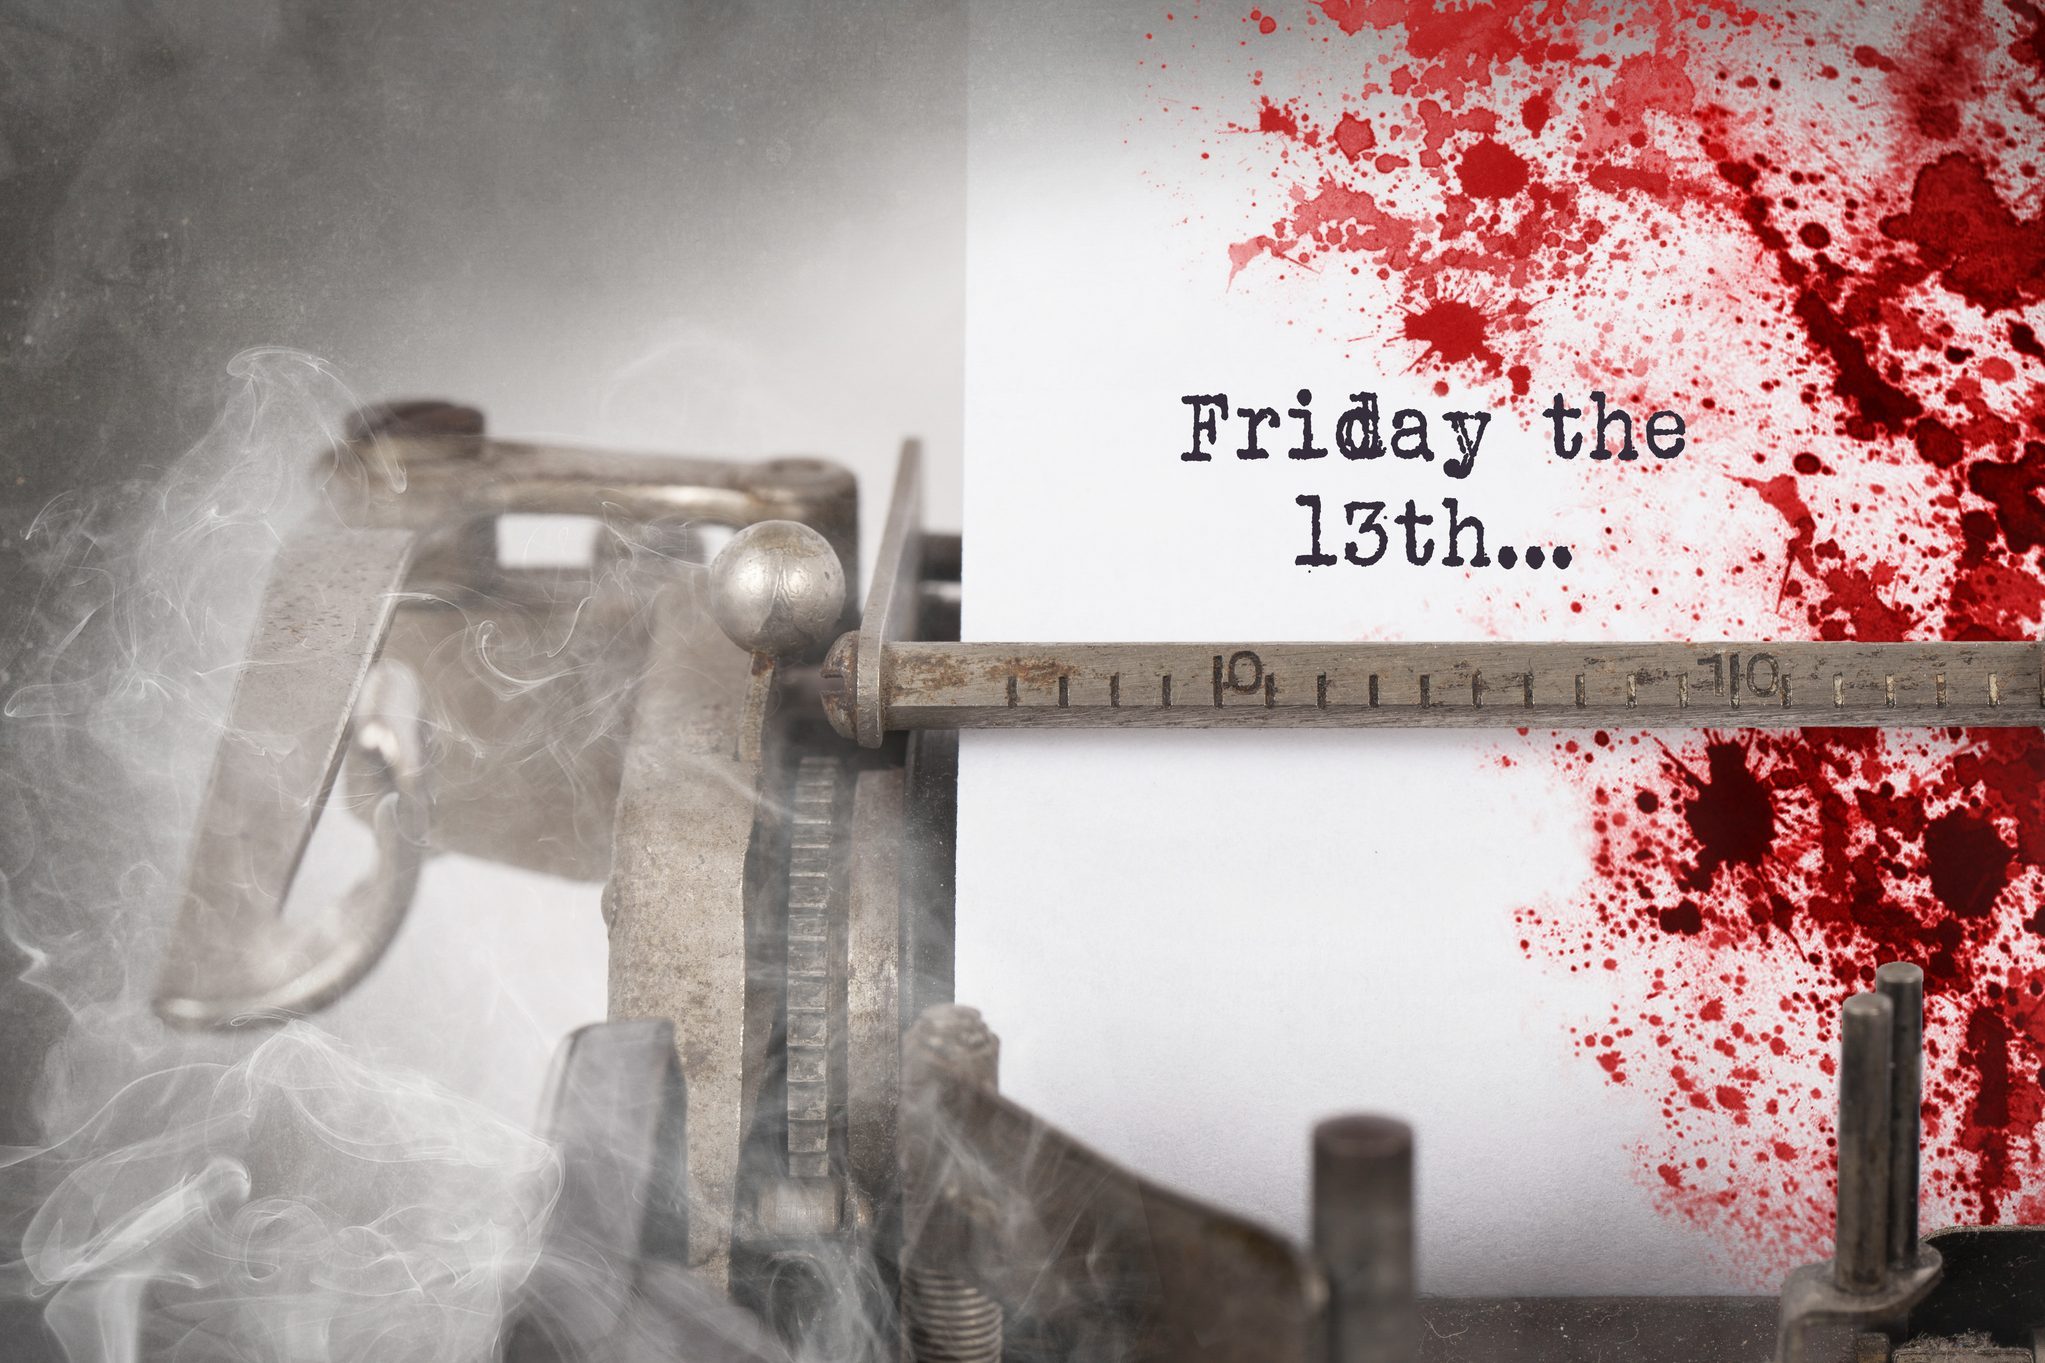 Is Friday the 13th truly unlucky? Why so?